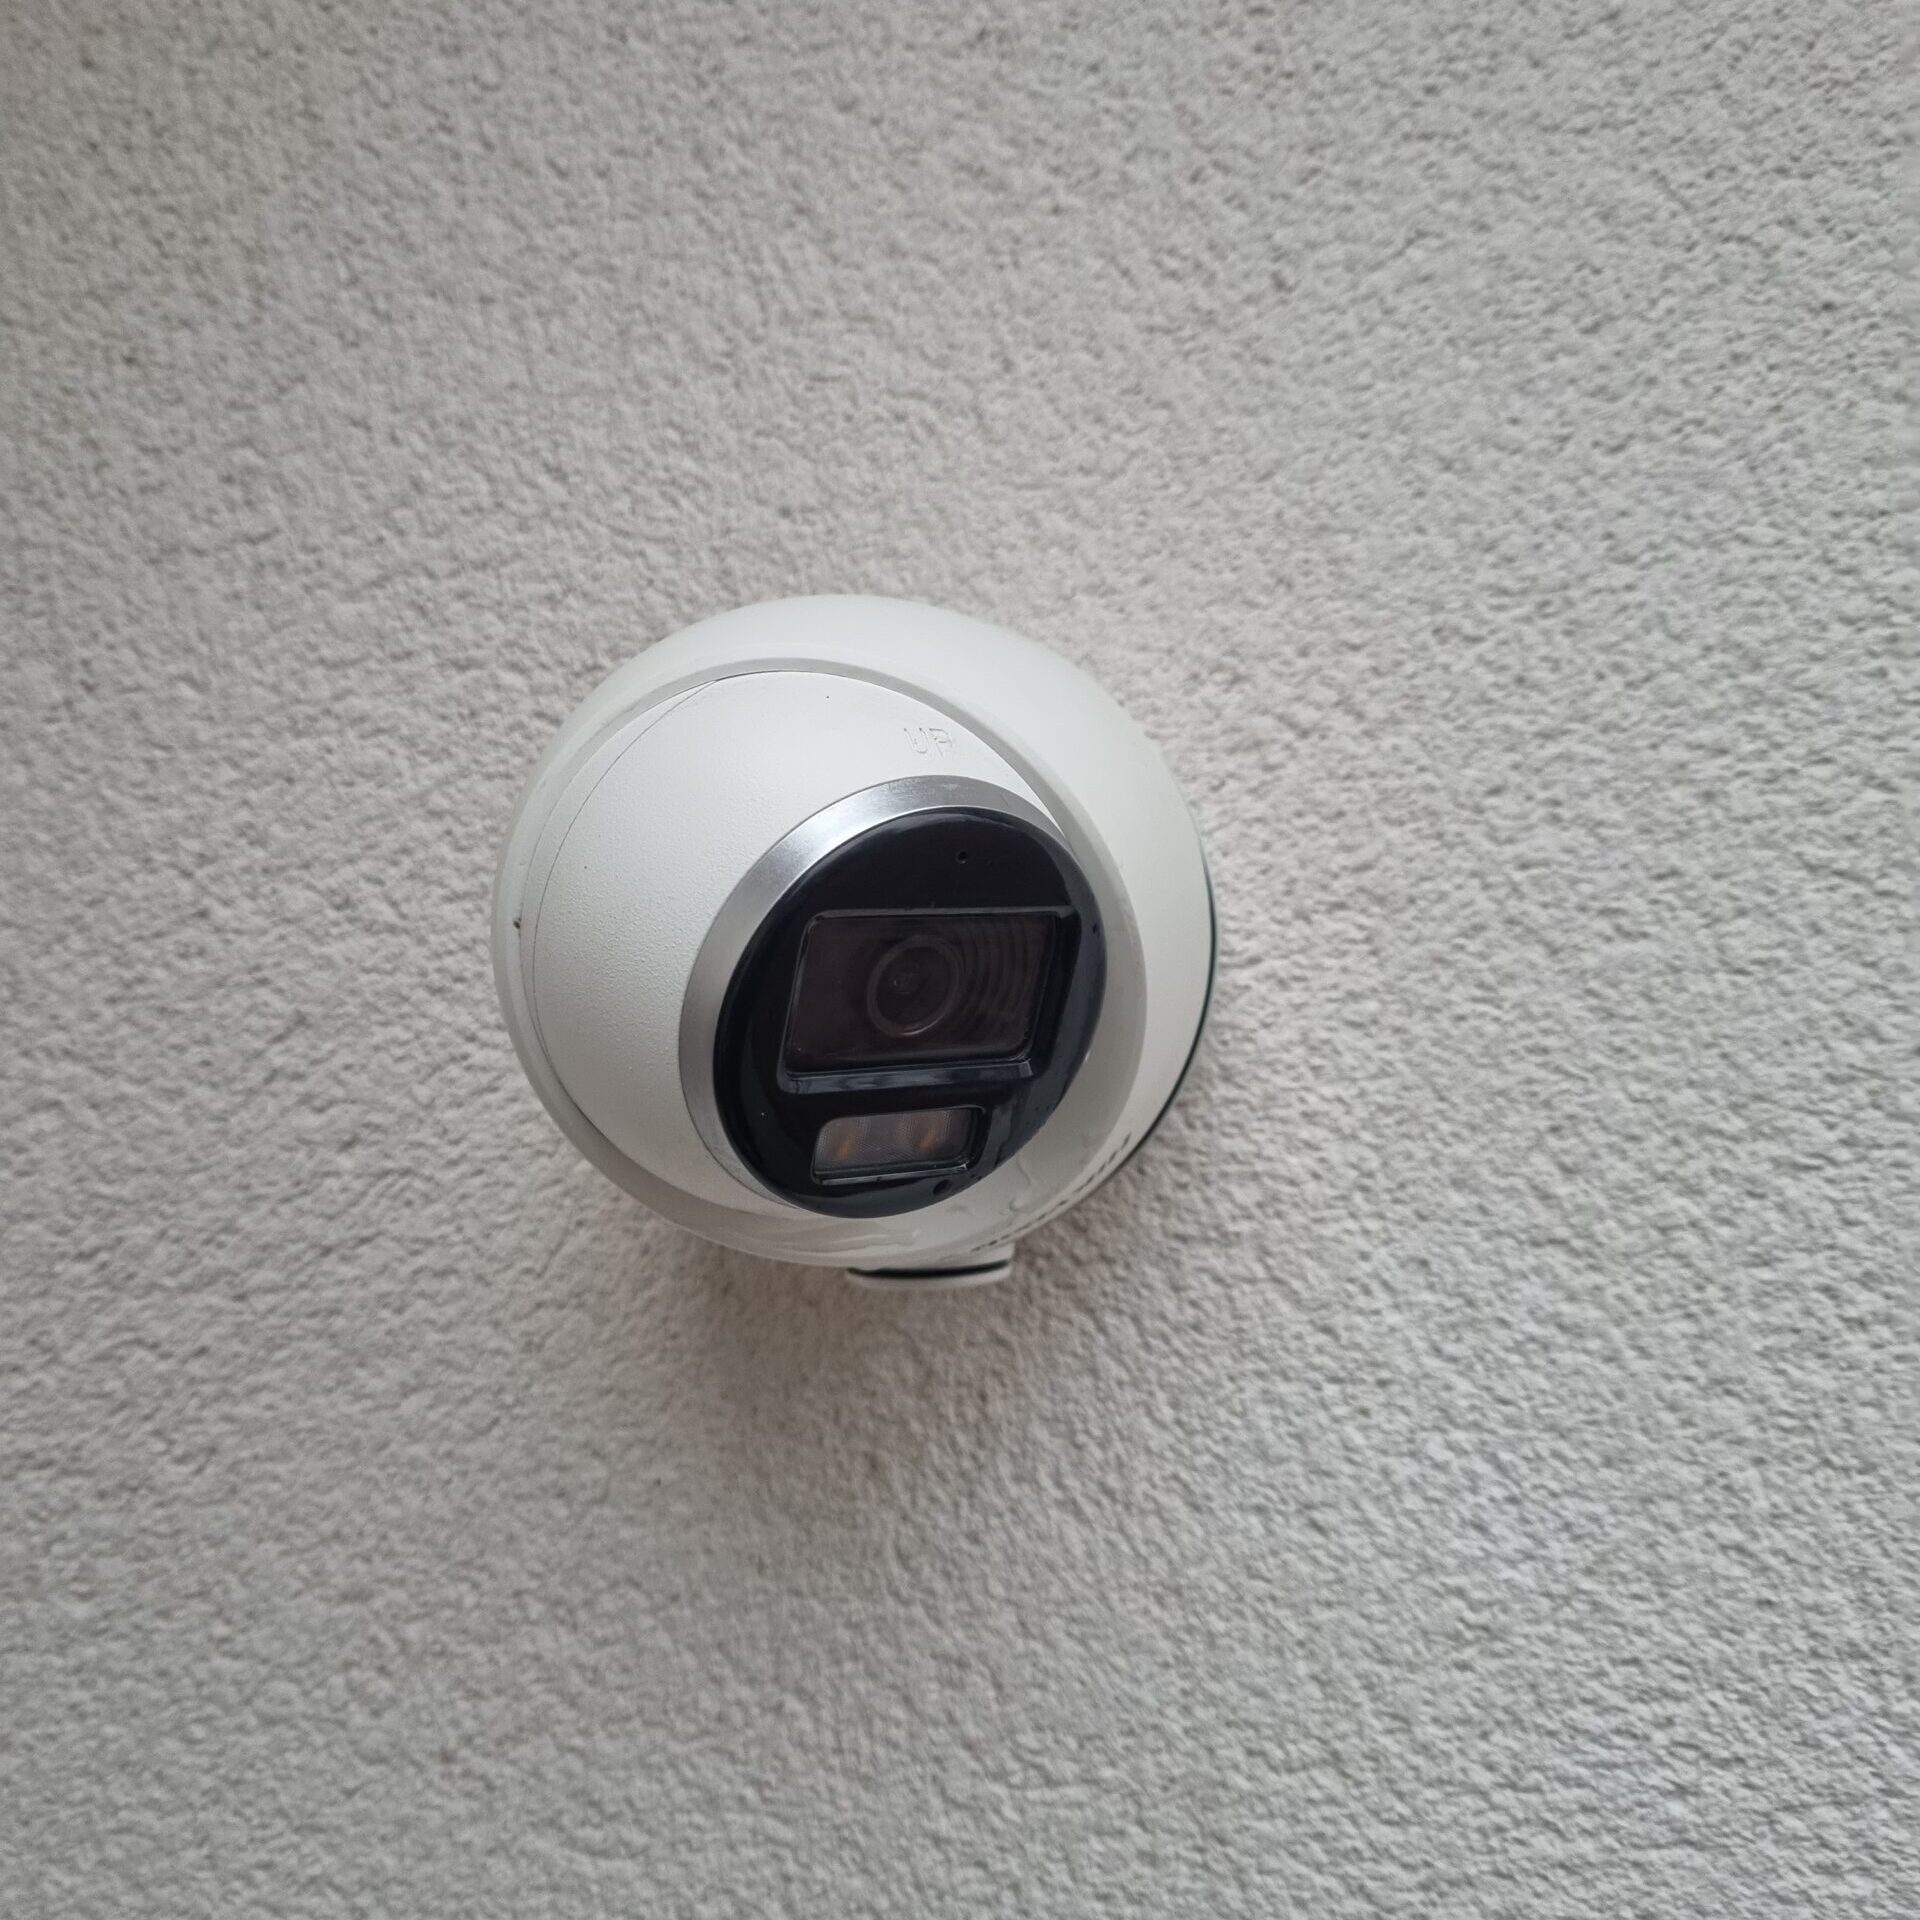 A whit CCTV camera fixed to a white wall